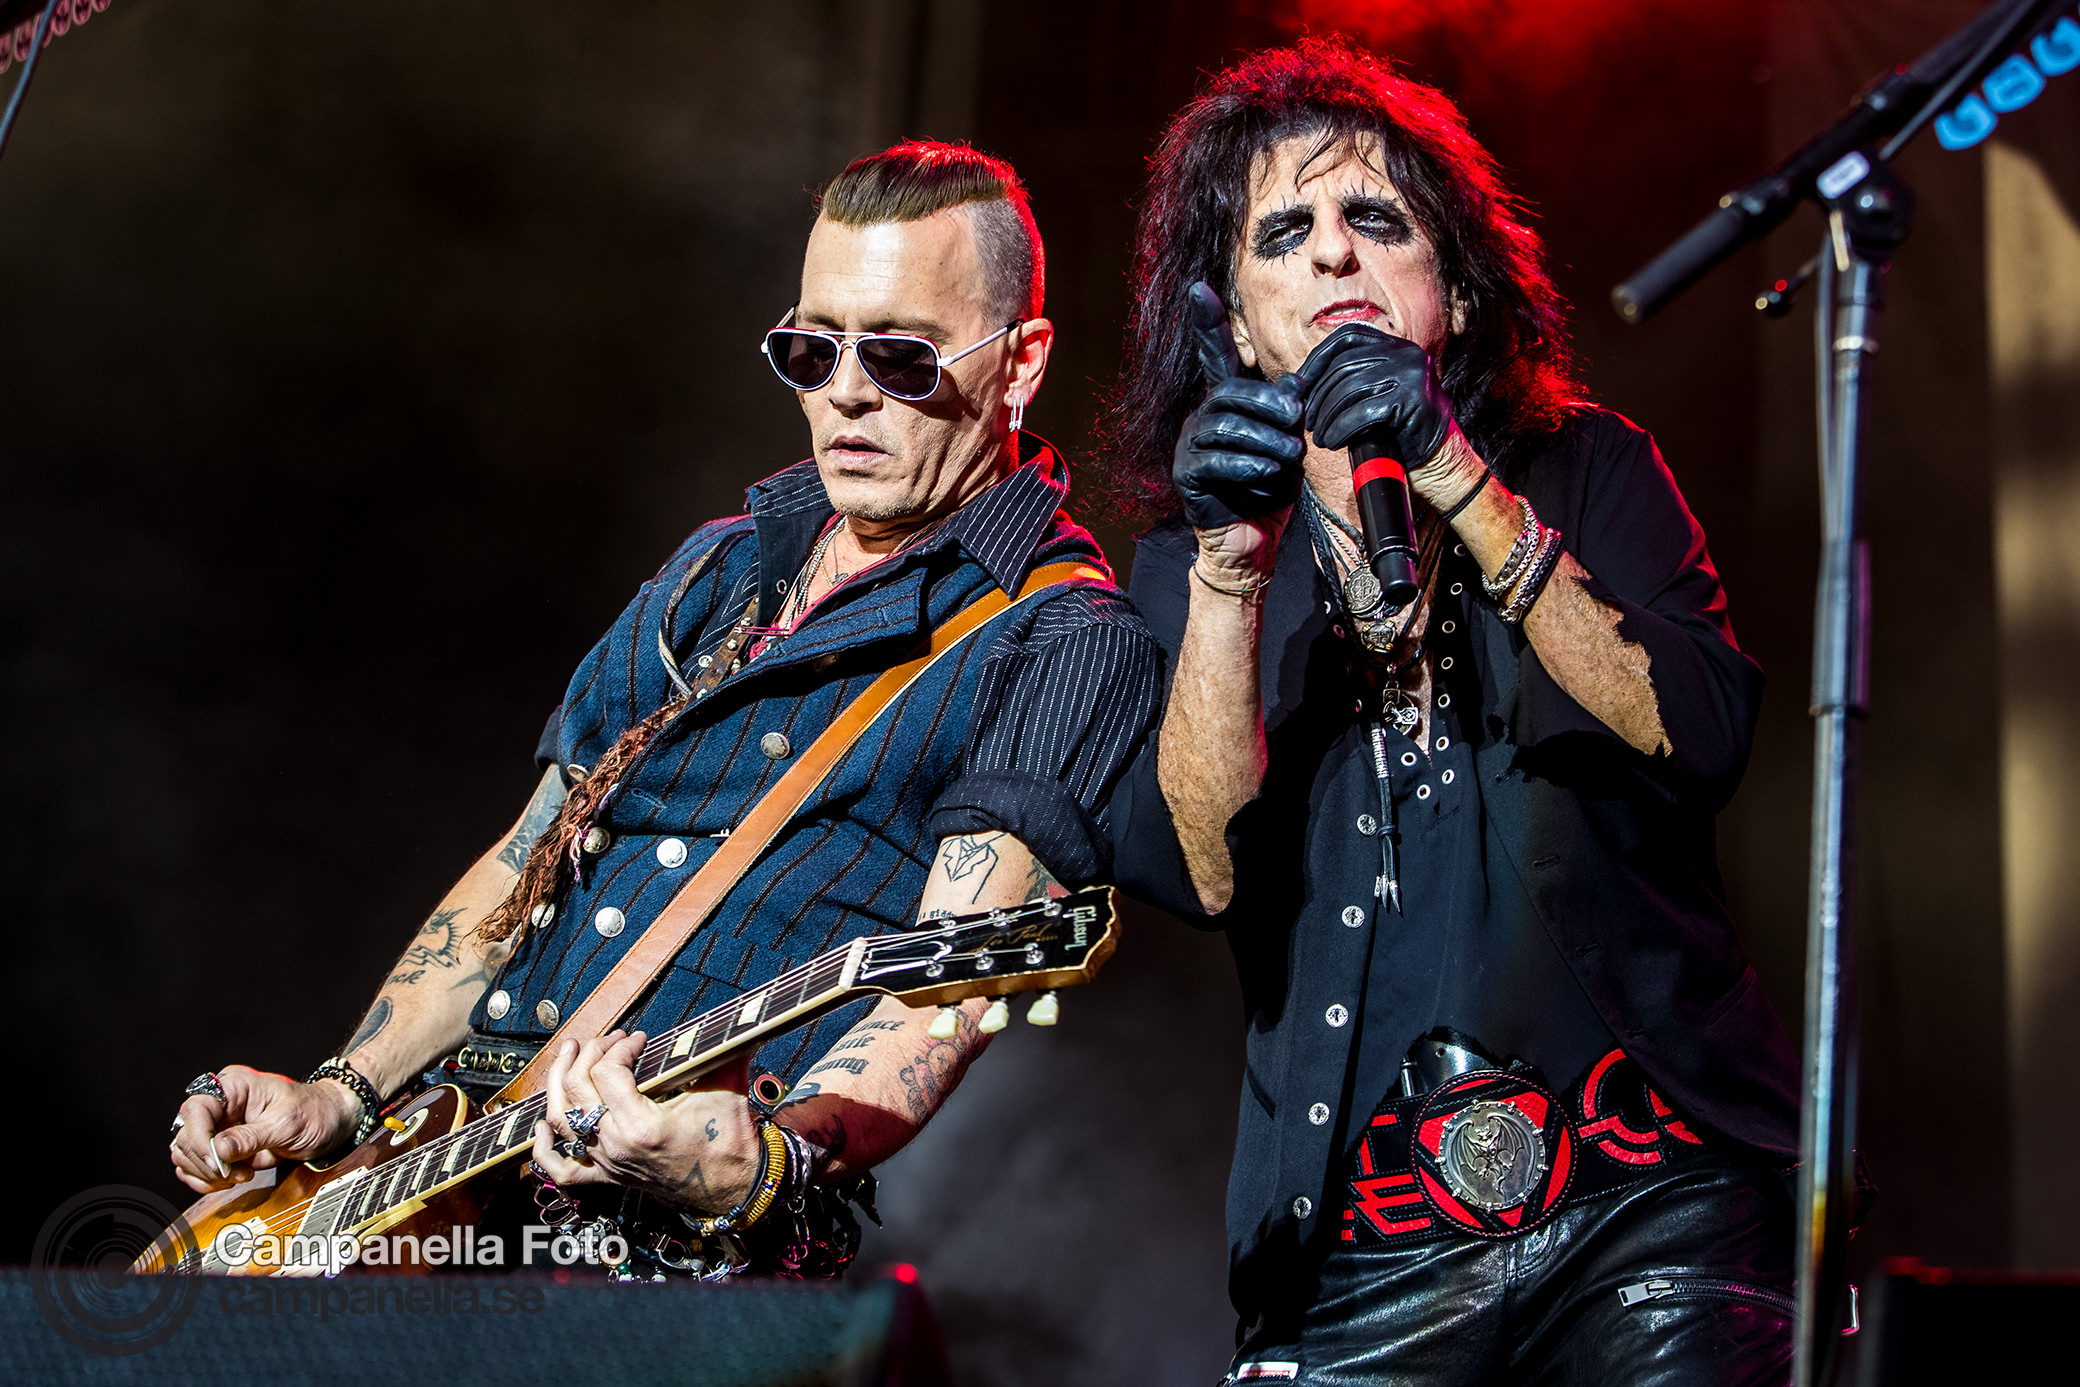 Hollywood Vampires perform in Stockholm - Michael Campanella Photography